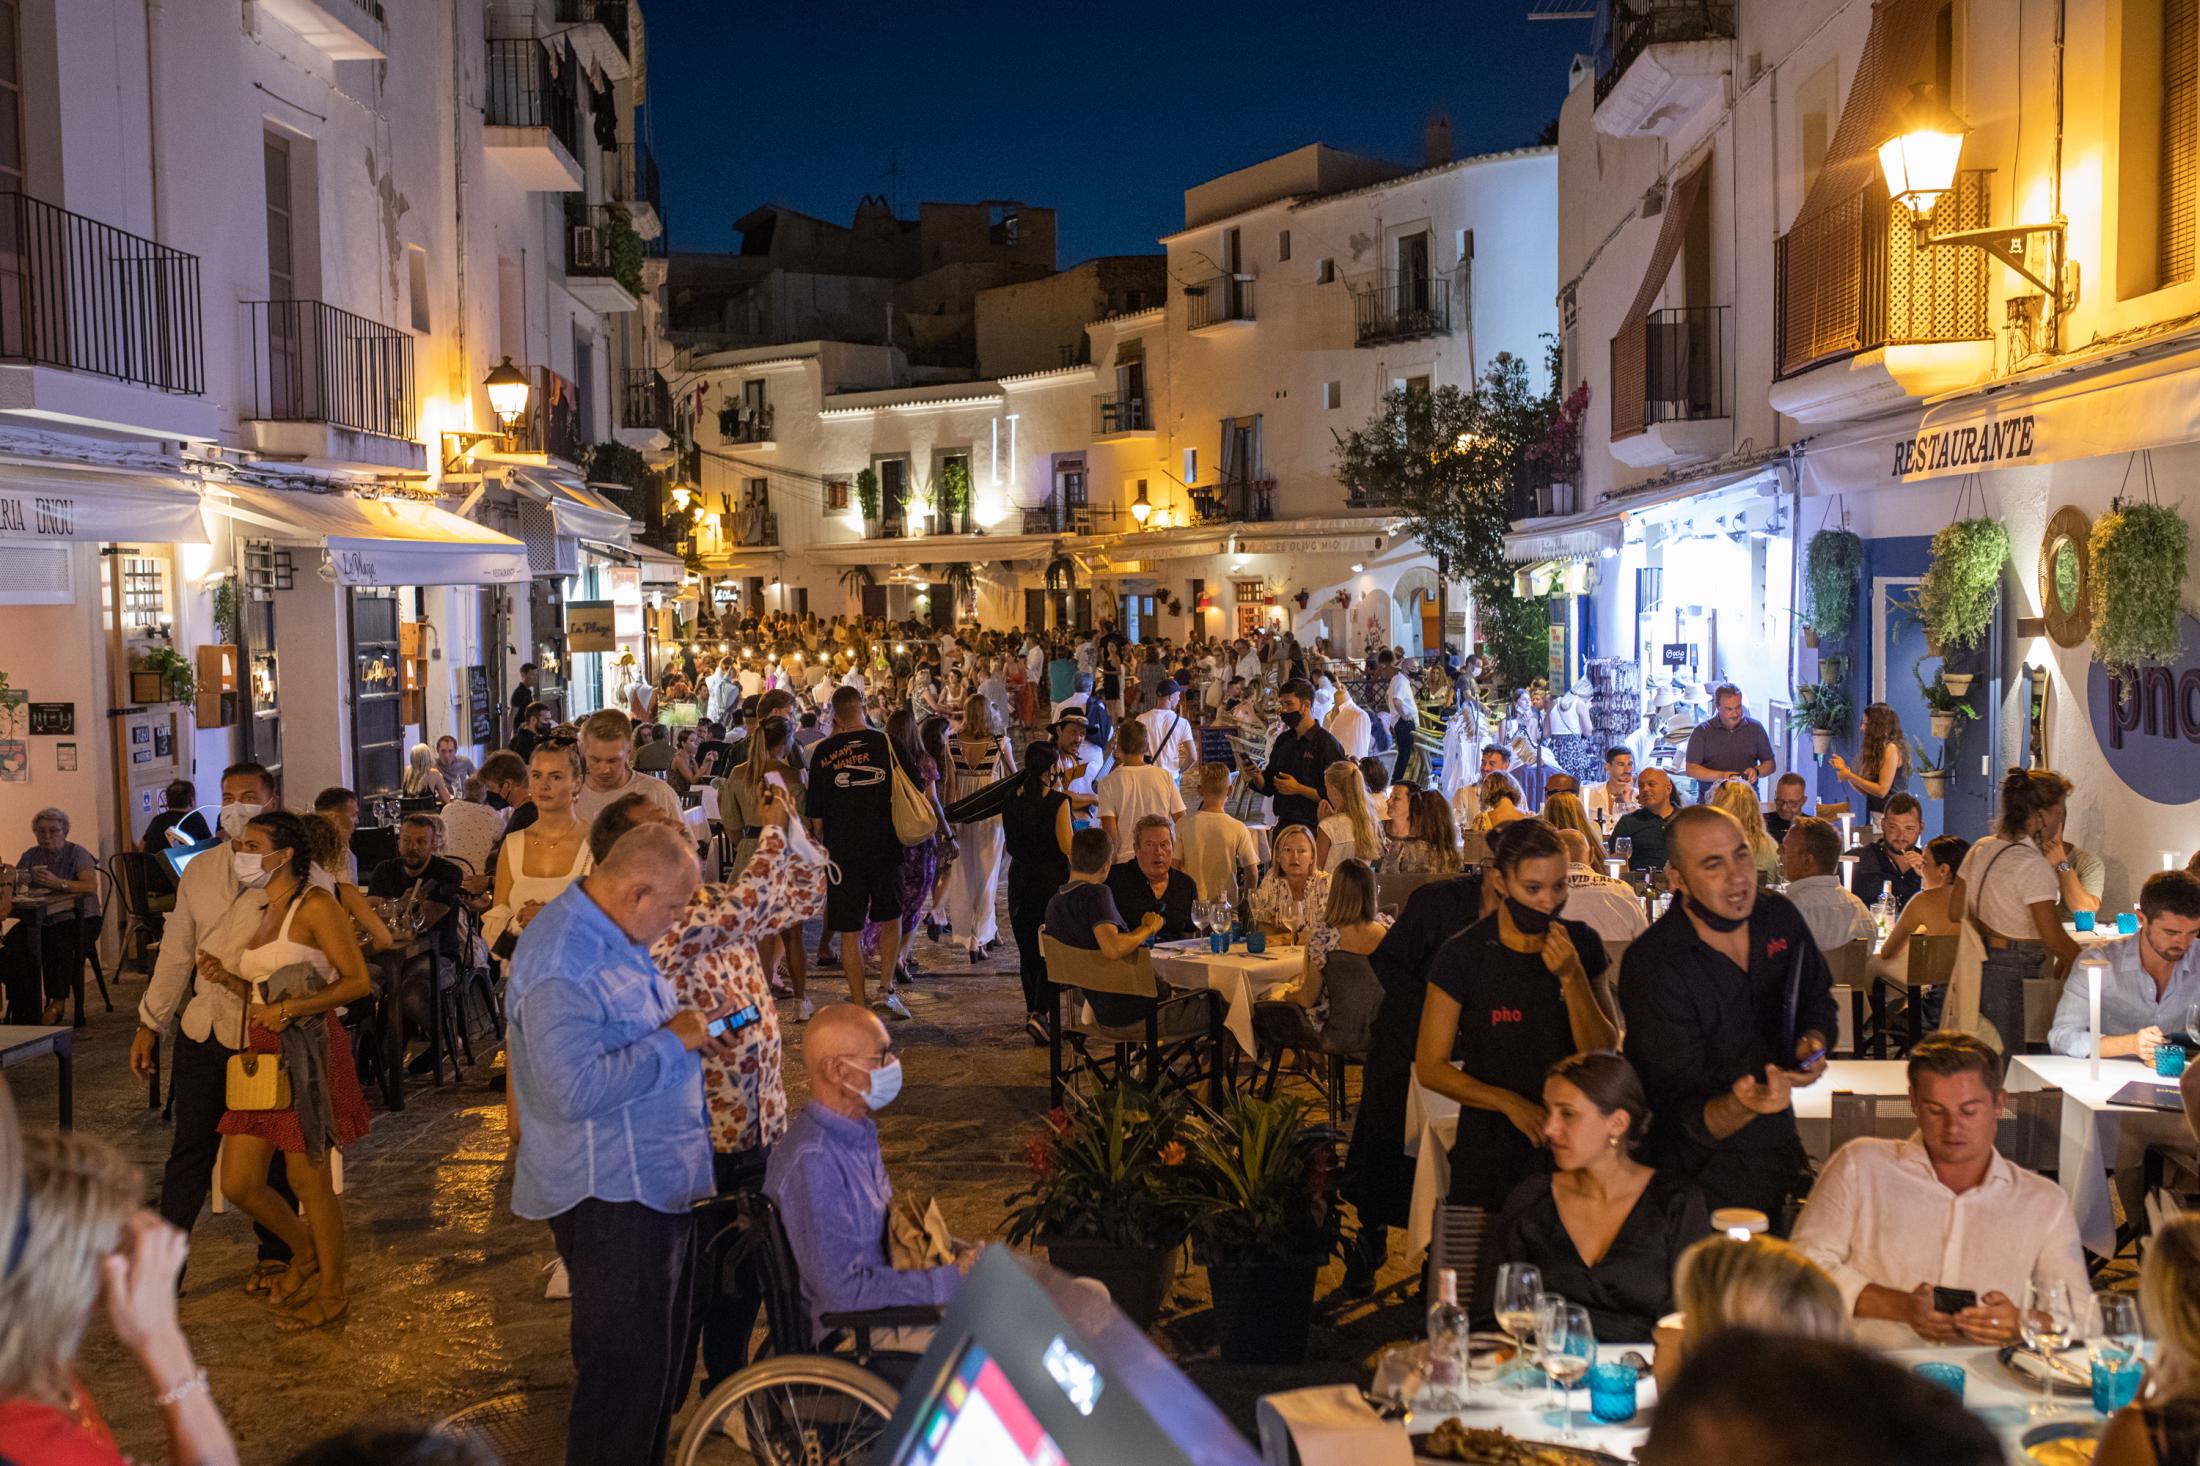 Covid-19: Ibiza Parties Infiltrated By Detectives - IBIZA, SPAIN - AUGUST 6: Crowds in the narrowest and most...